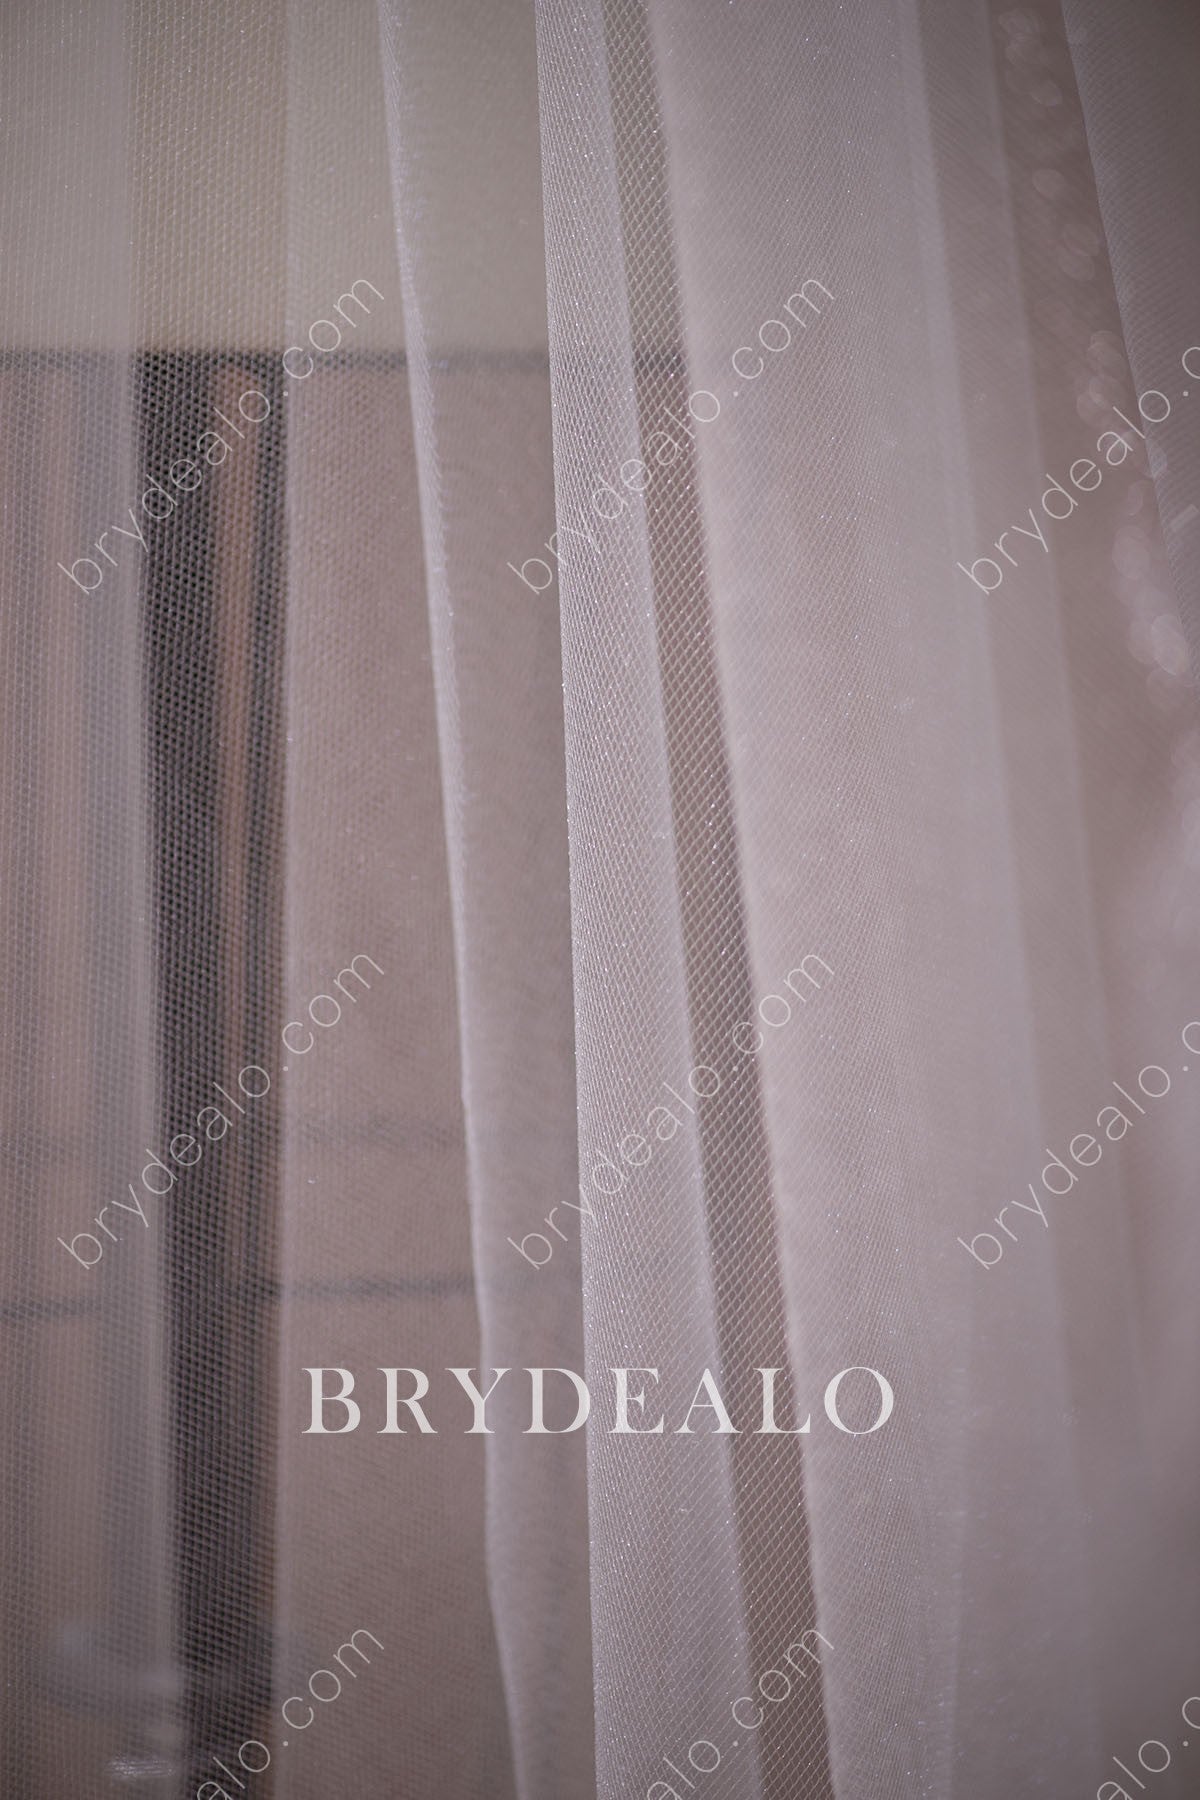 Shimmery Bridal Veil Tulle Fabric for Wholesale